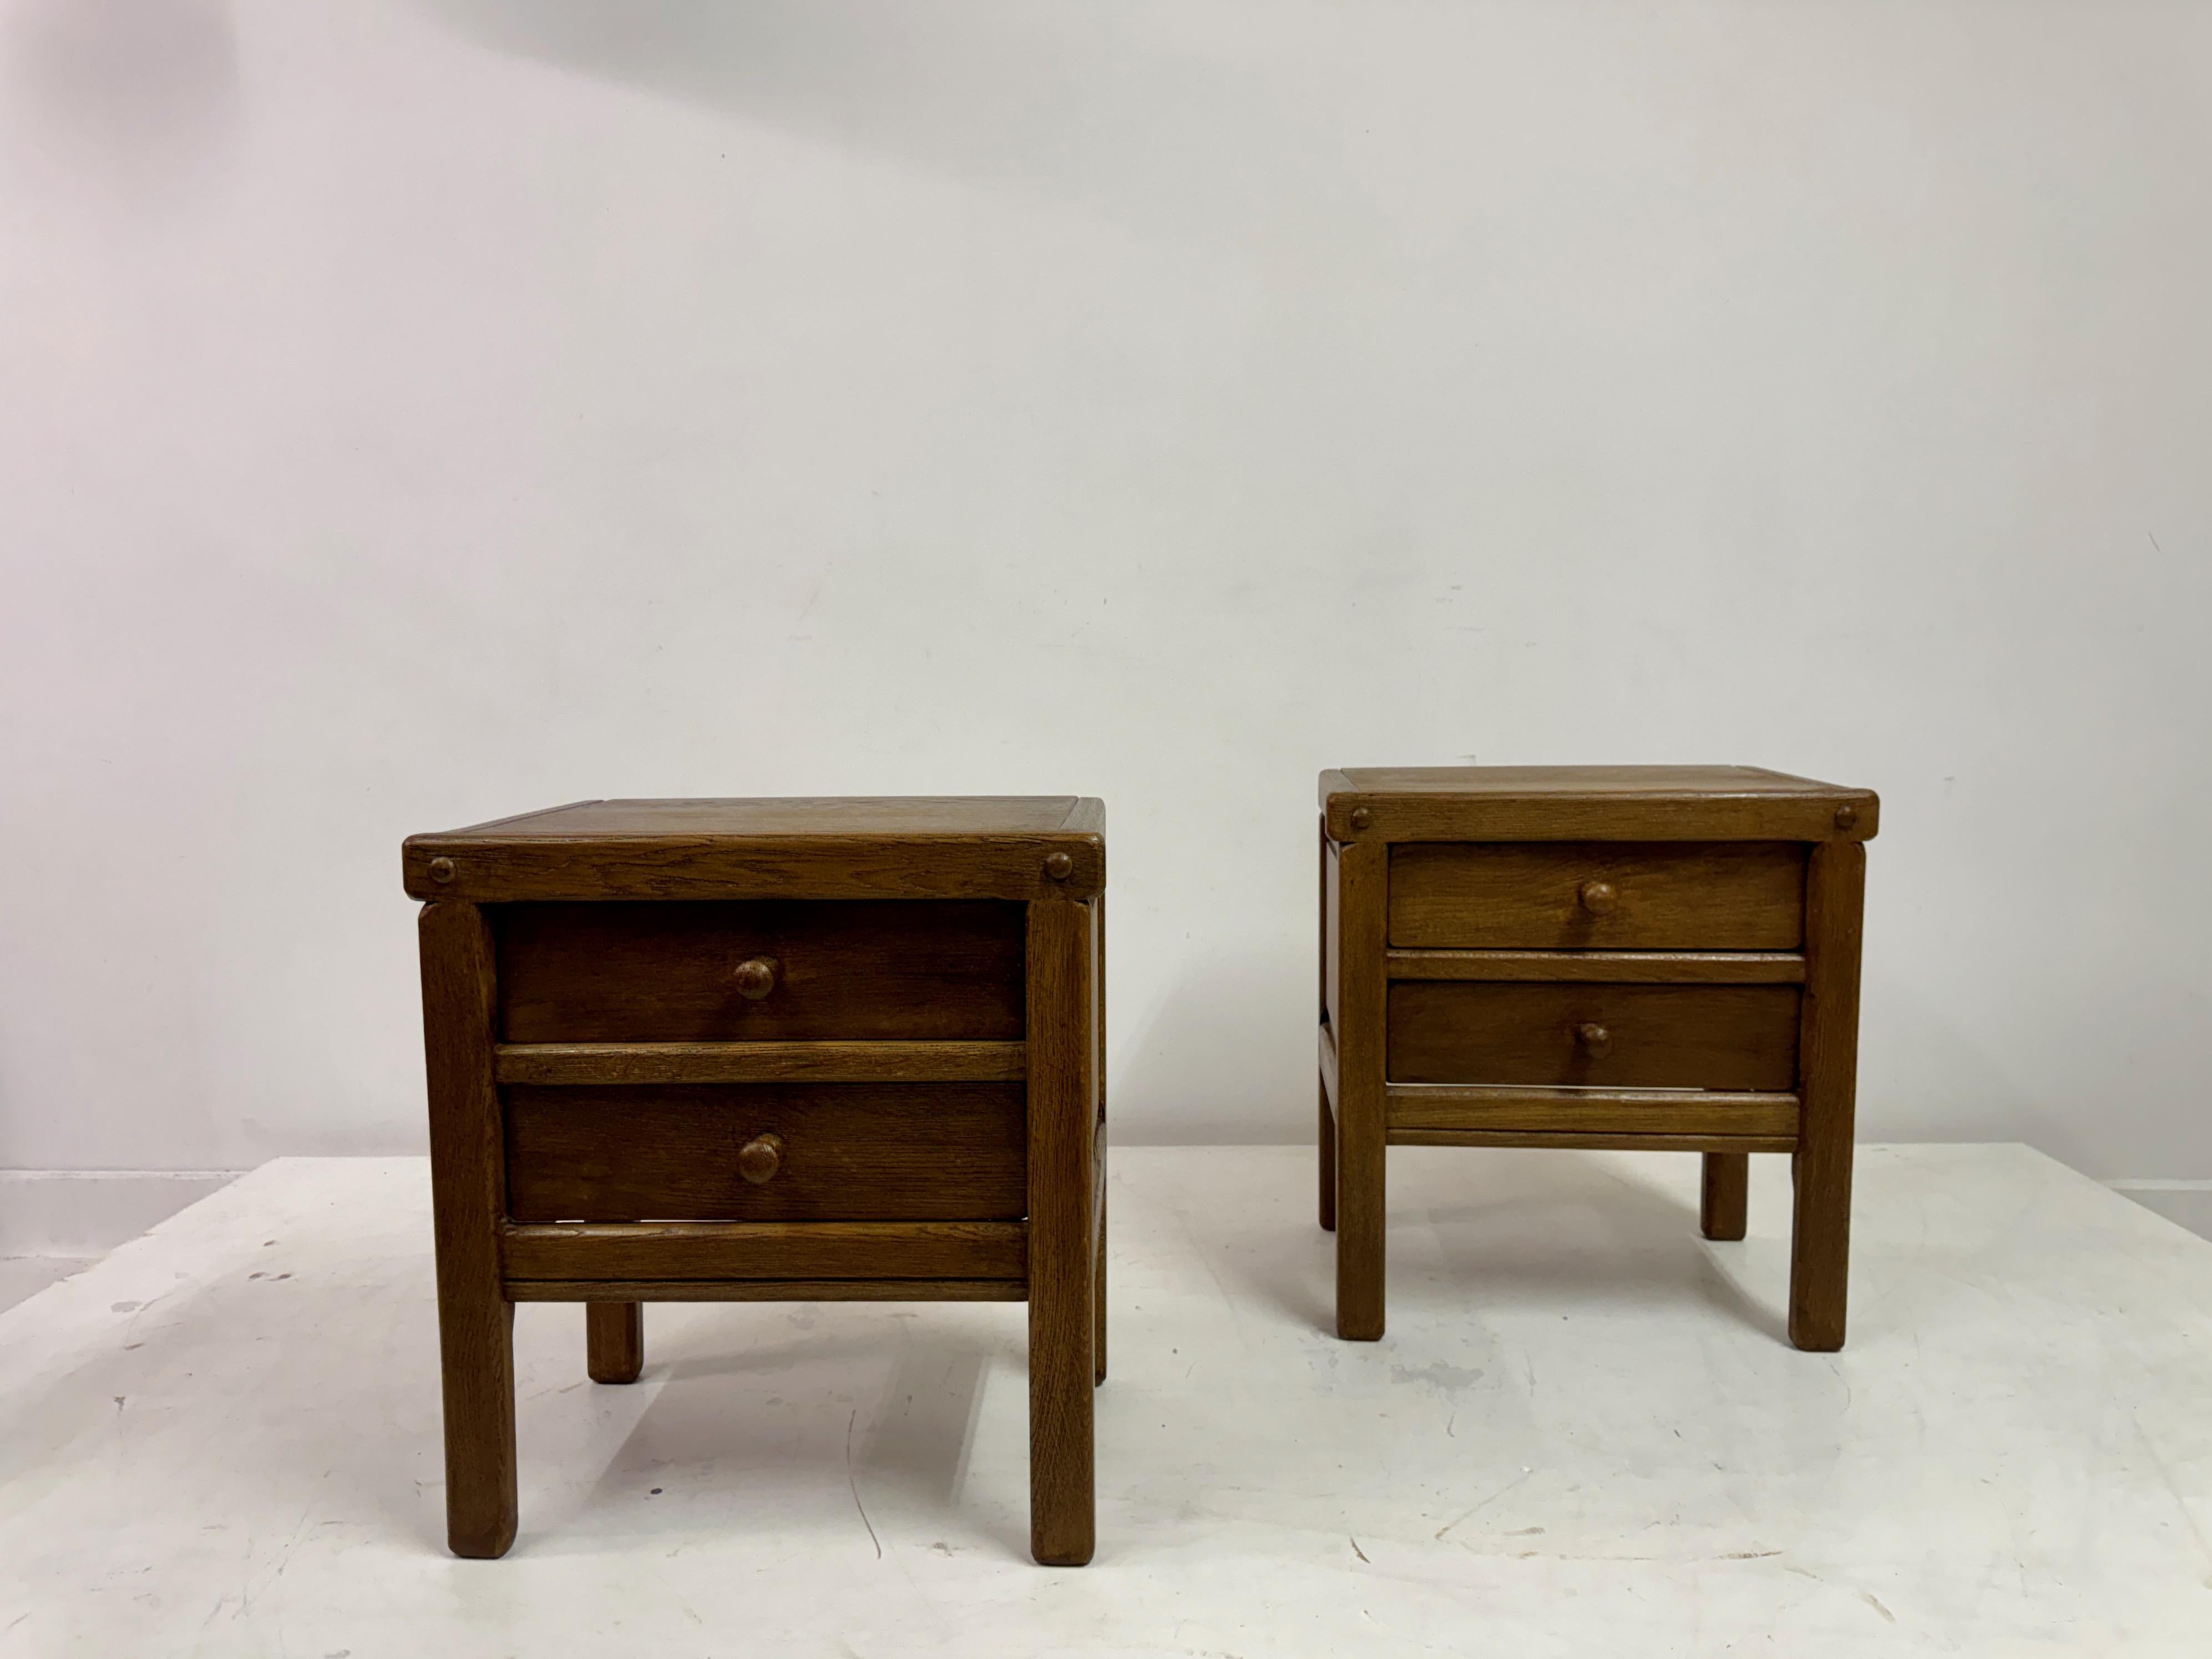 Pair of bedside tables

Two drawers

Oak

Brutalist style

Belgium 1960s